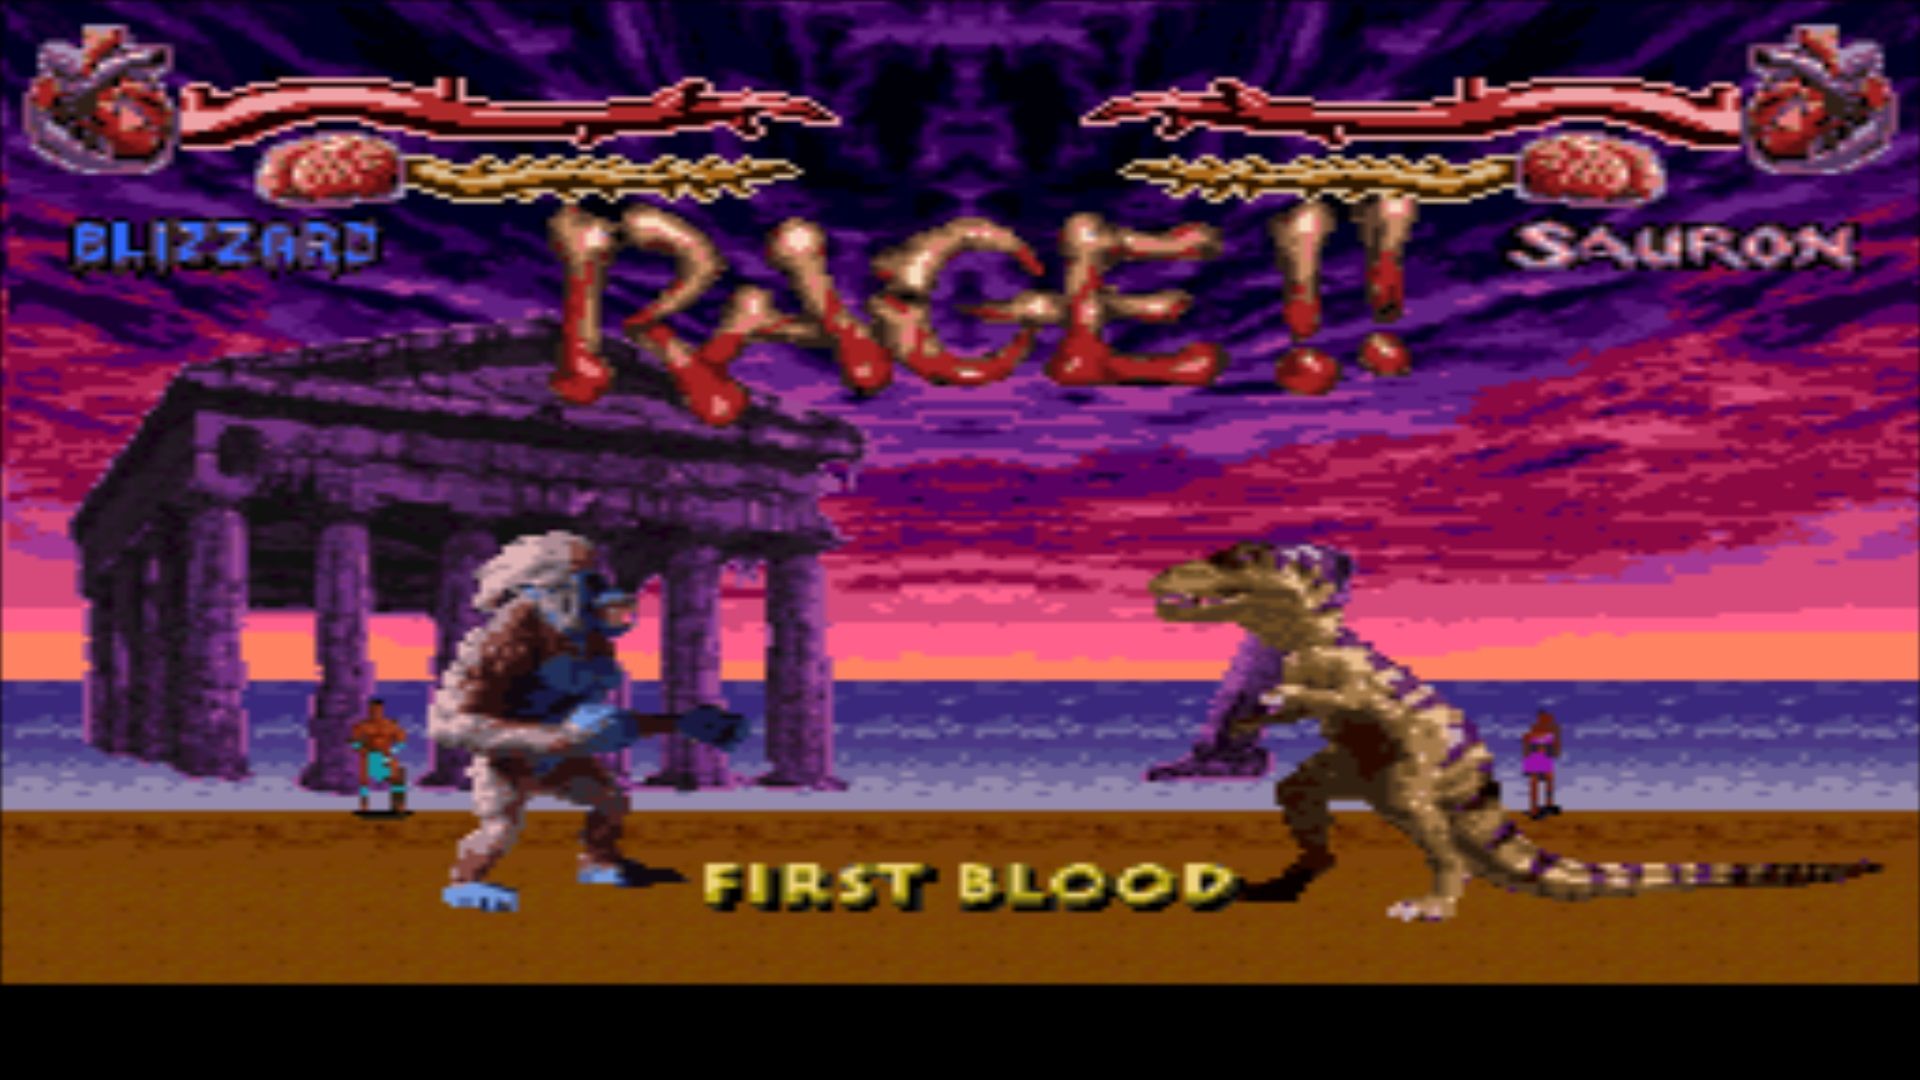 The monsters collide in Primal Rage.